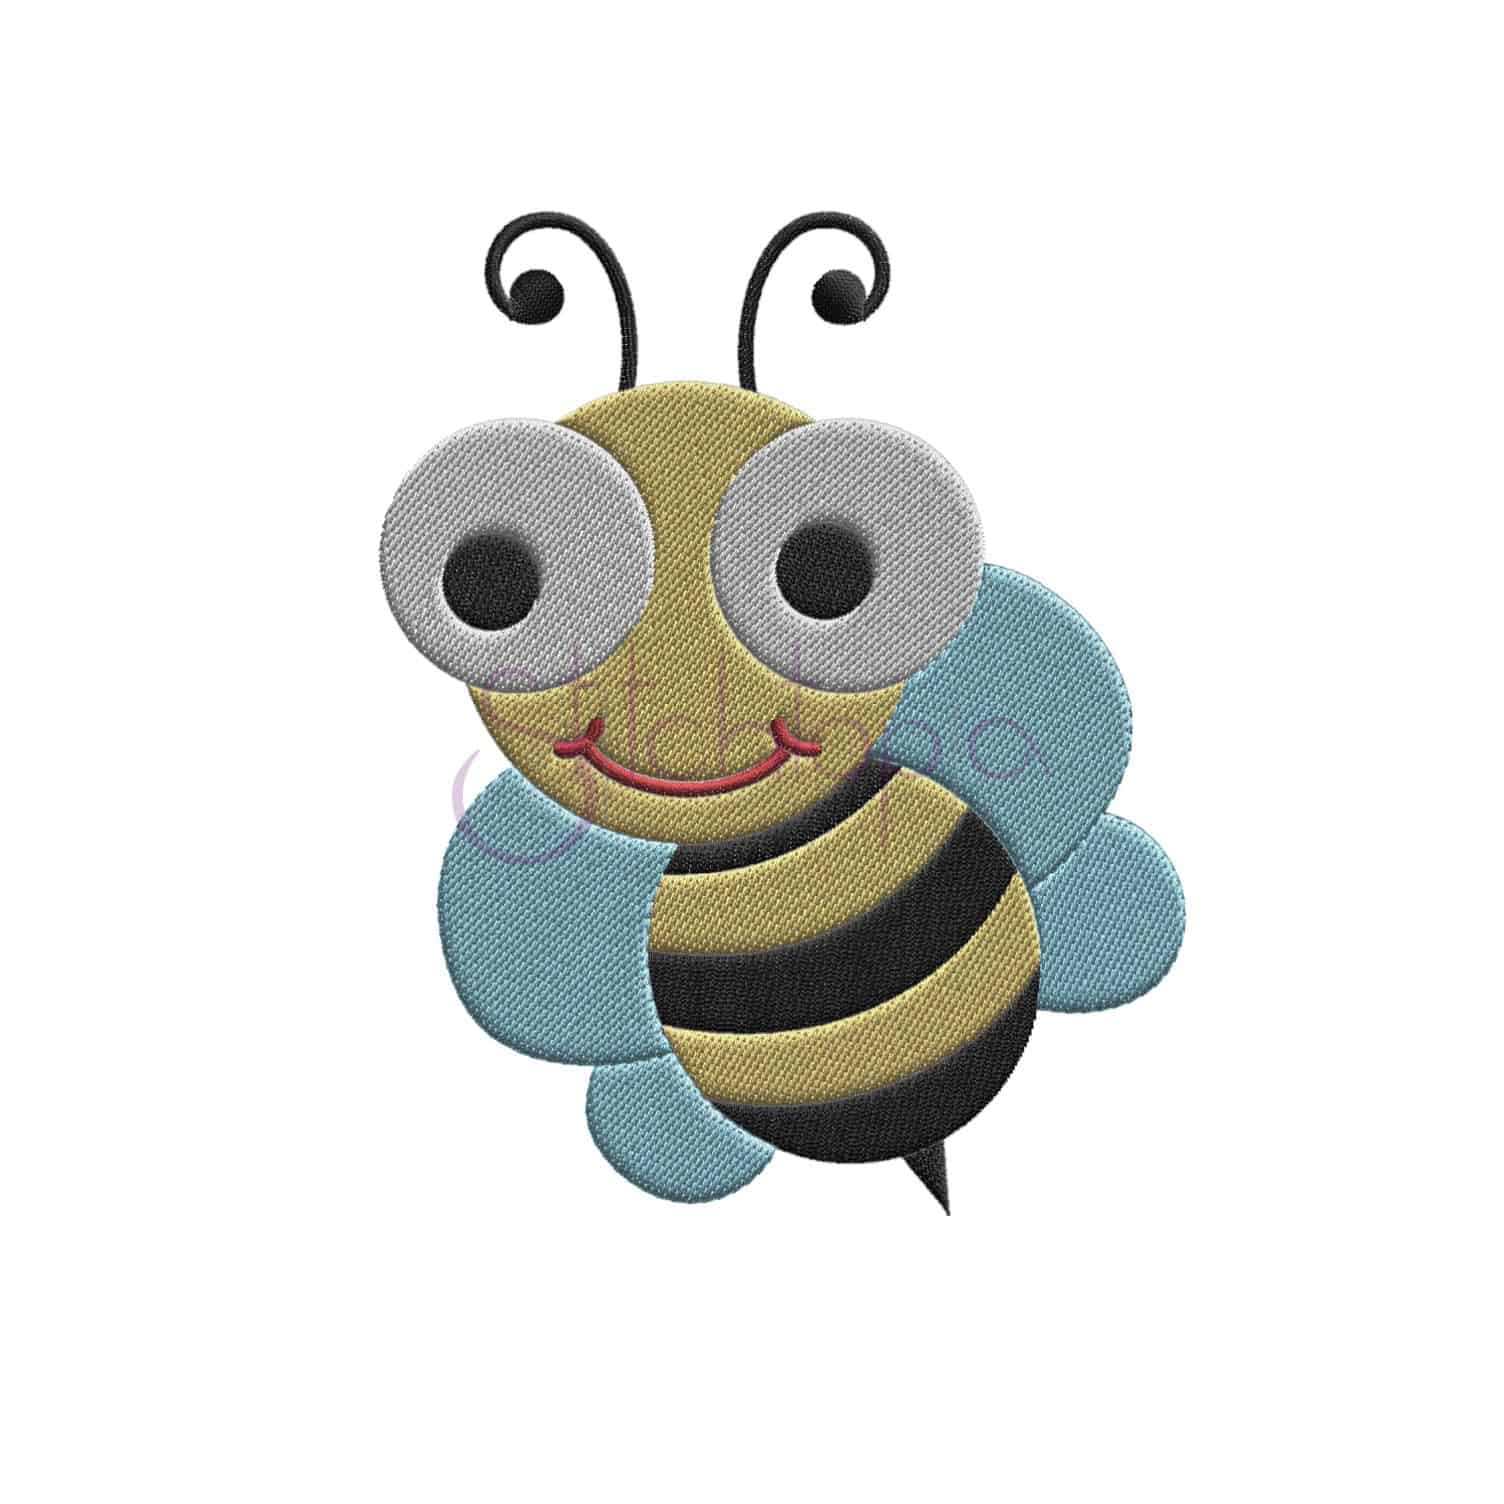 Bee Embroidery Designs